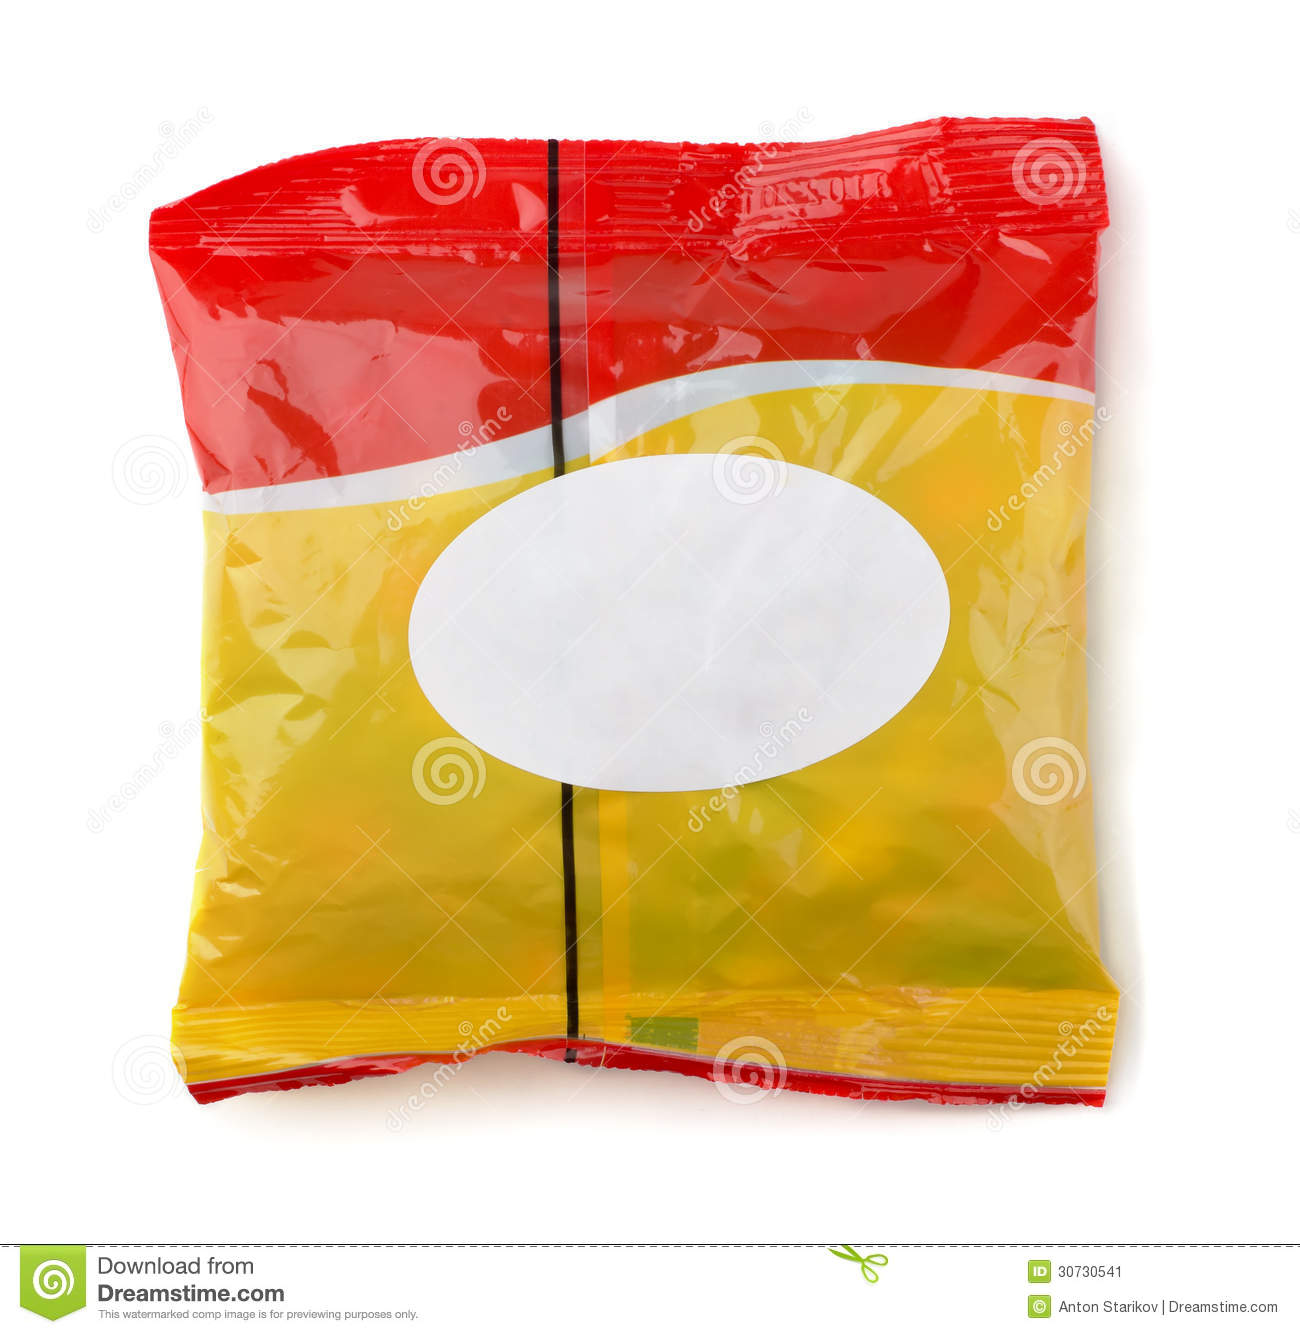 Food Packet With White Label Isolated On White Mr No Pr No 2 533 4